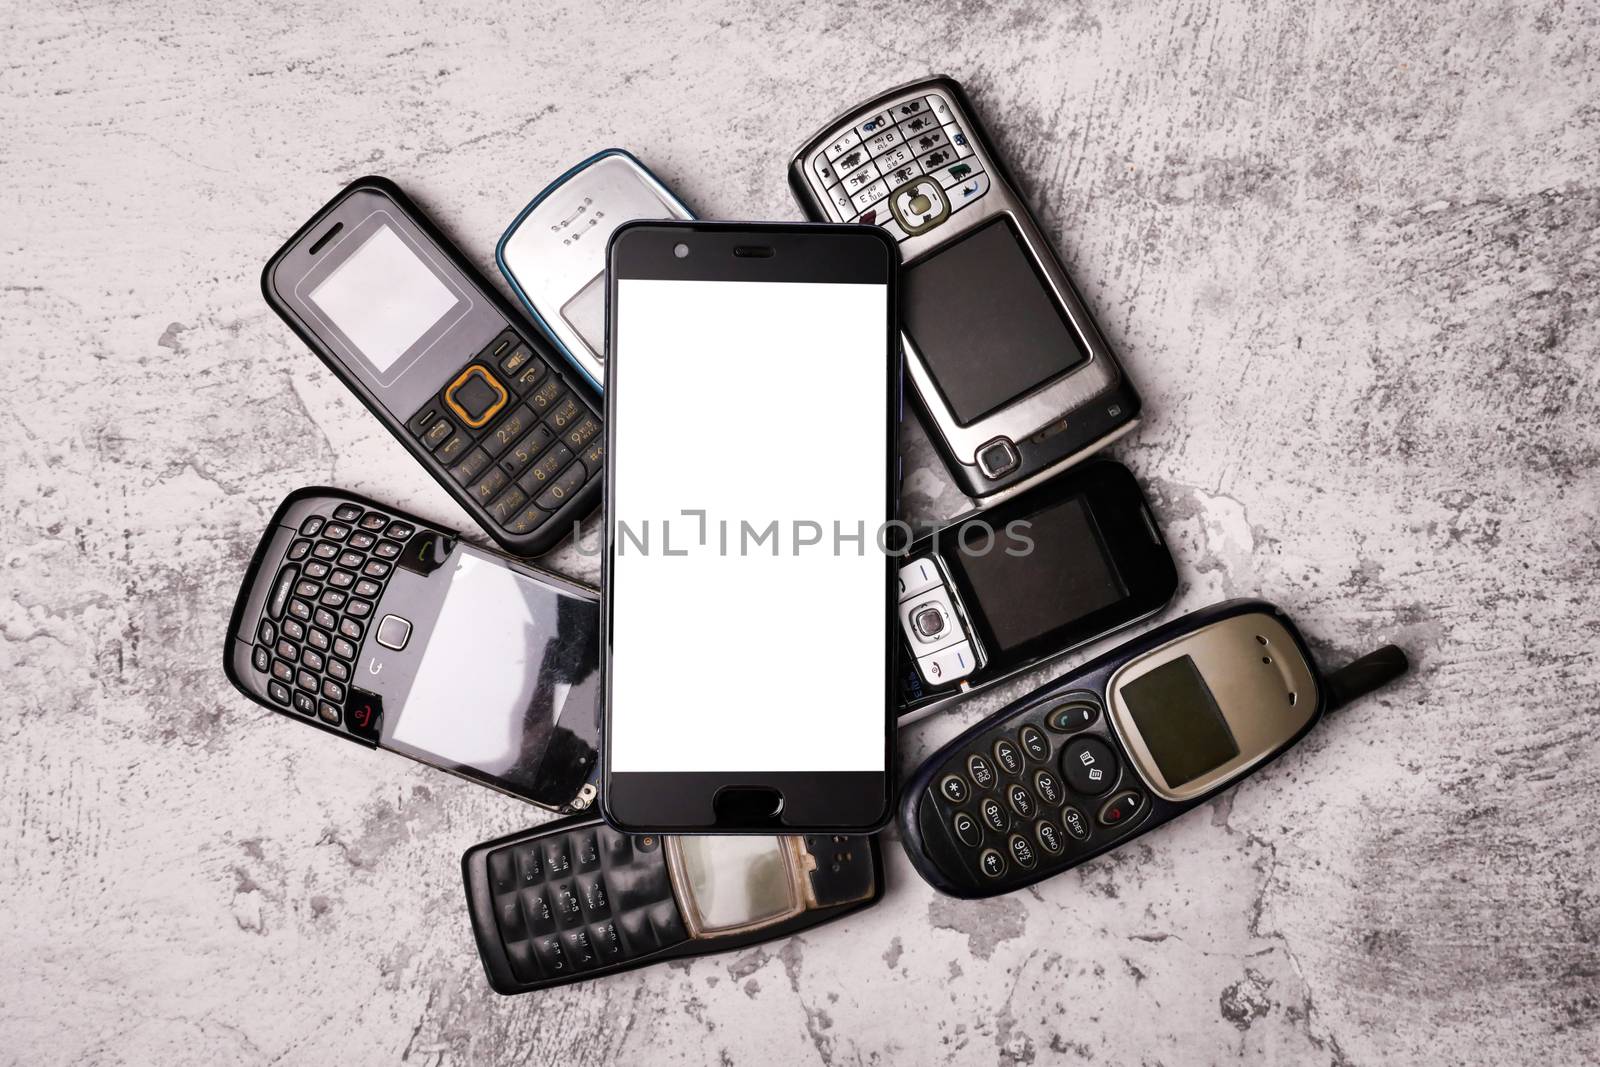 Many obsoleted cellphones and a smartphone on a grunge backgroun by ronnarong